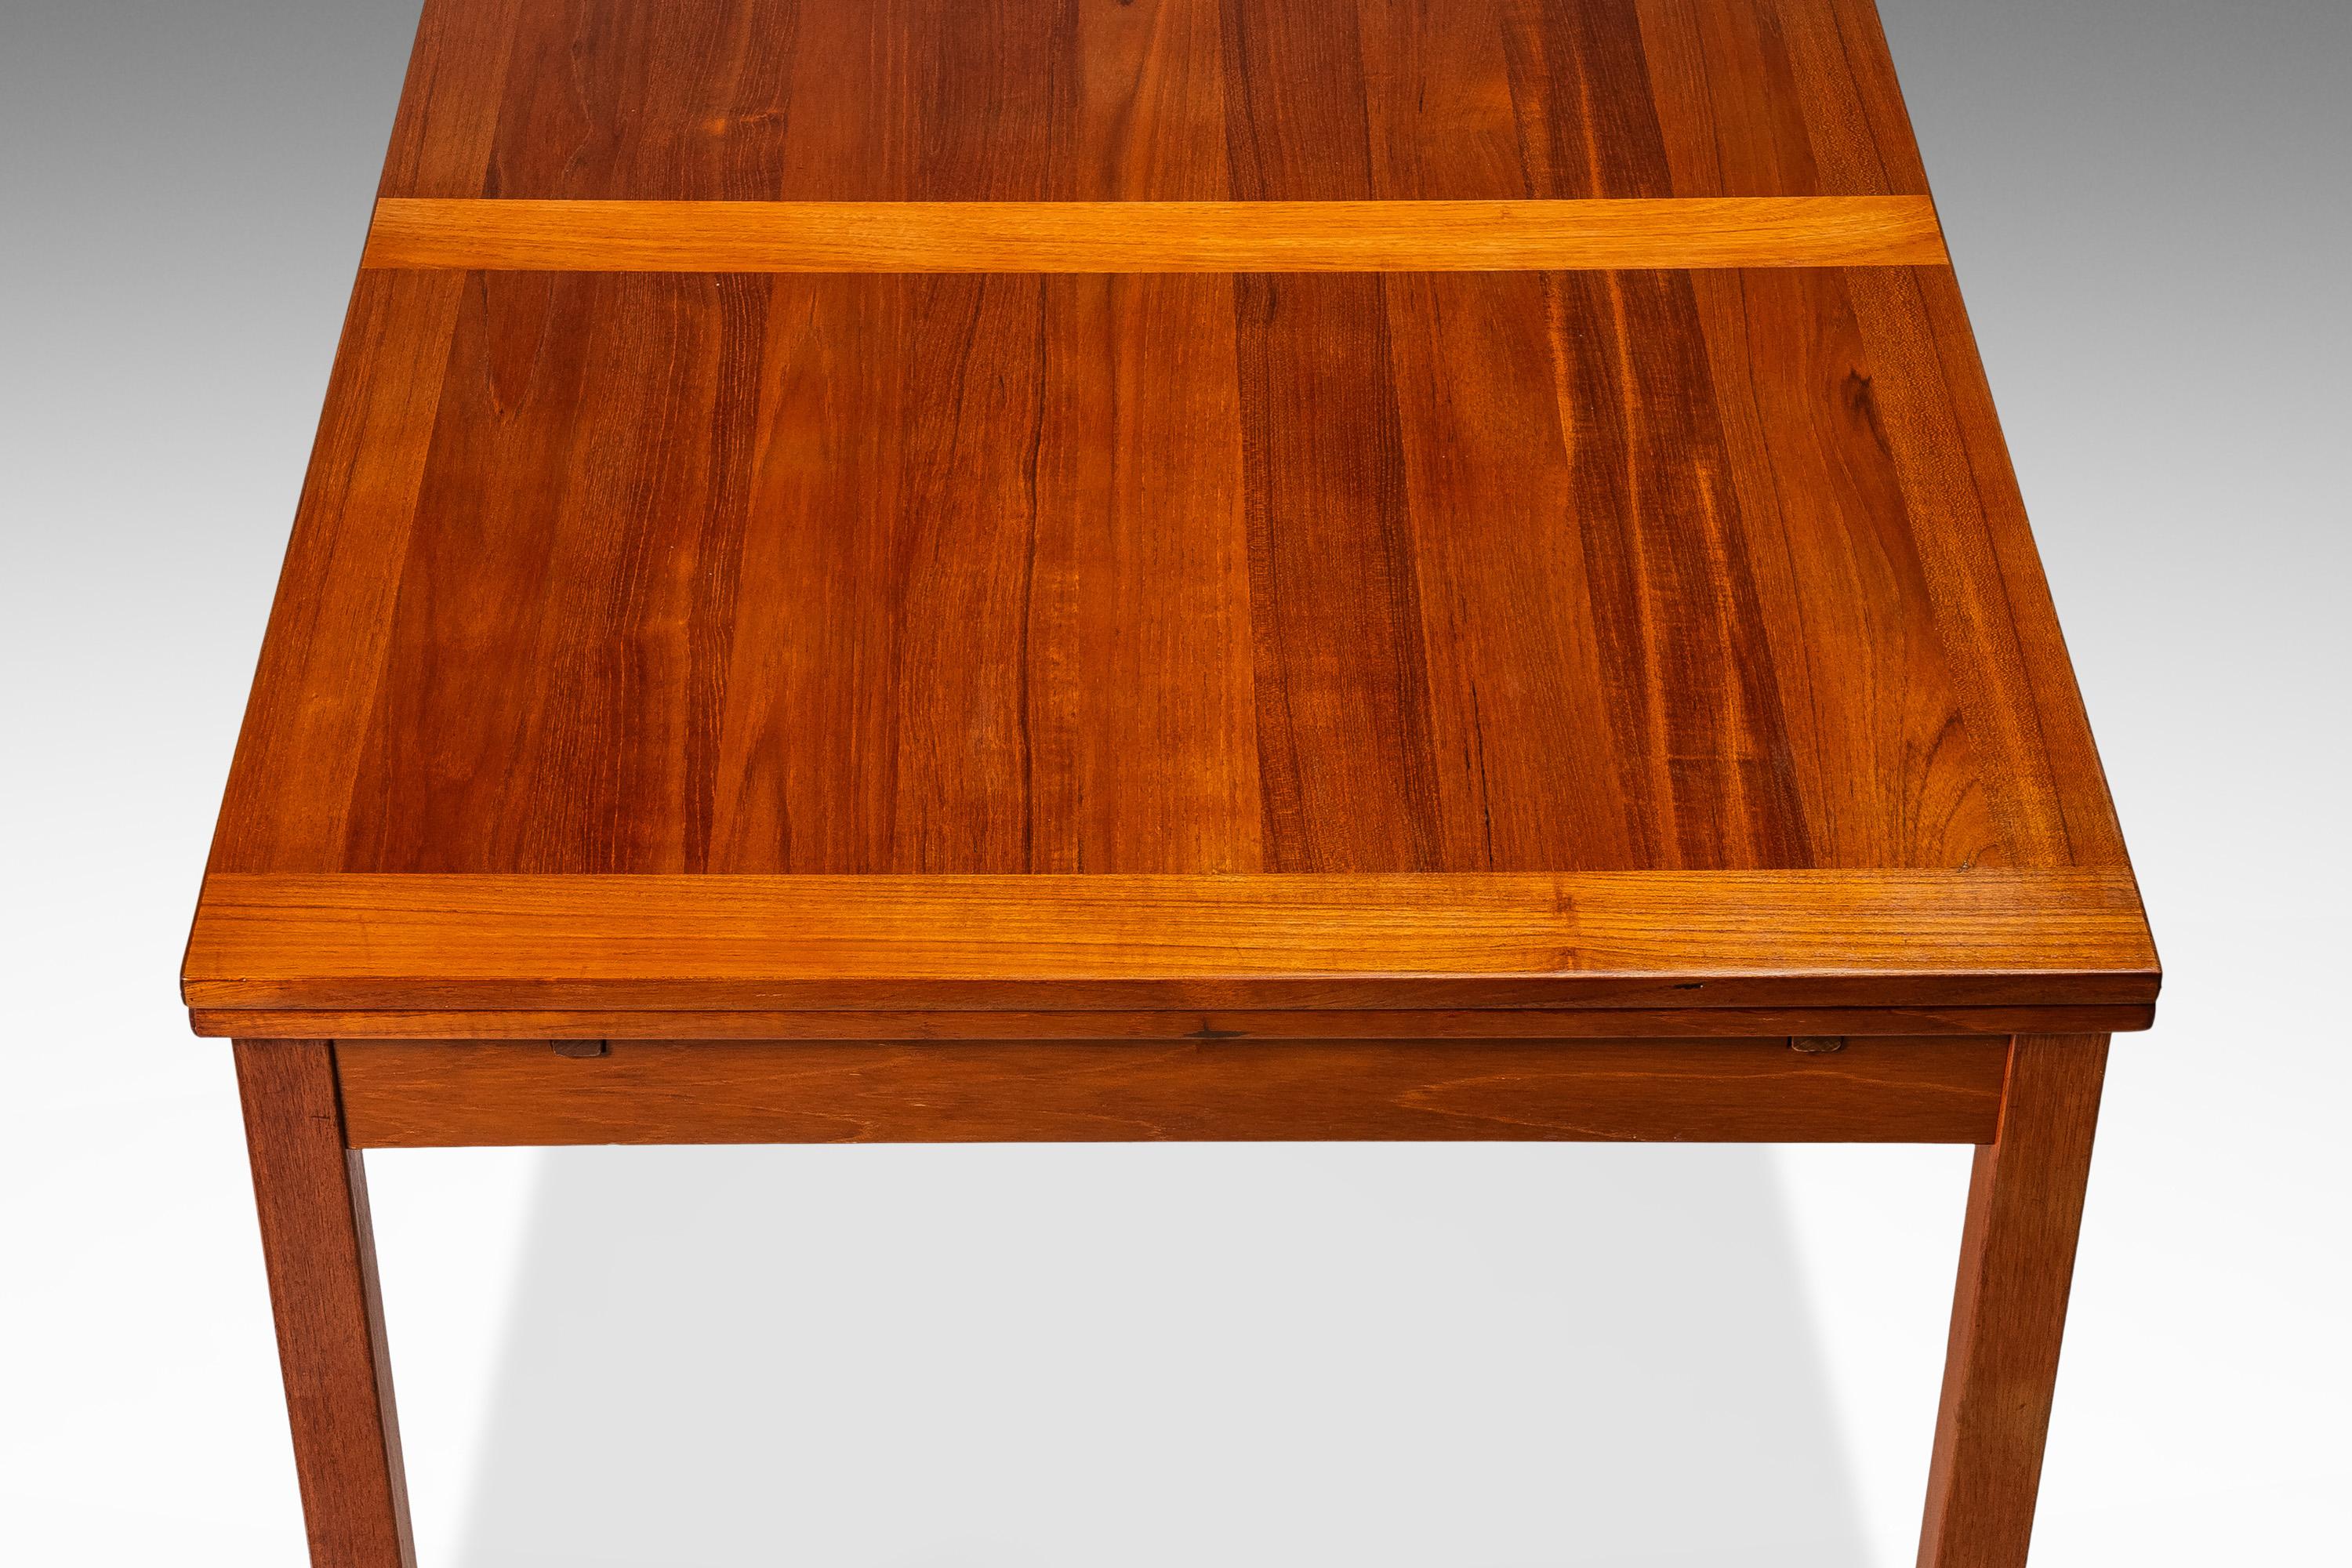 Danish Teak Extension Dining Table with Stow-in-Table Leaves, Denmark, c. 1970s For Sale 5